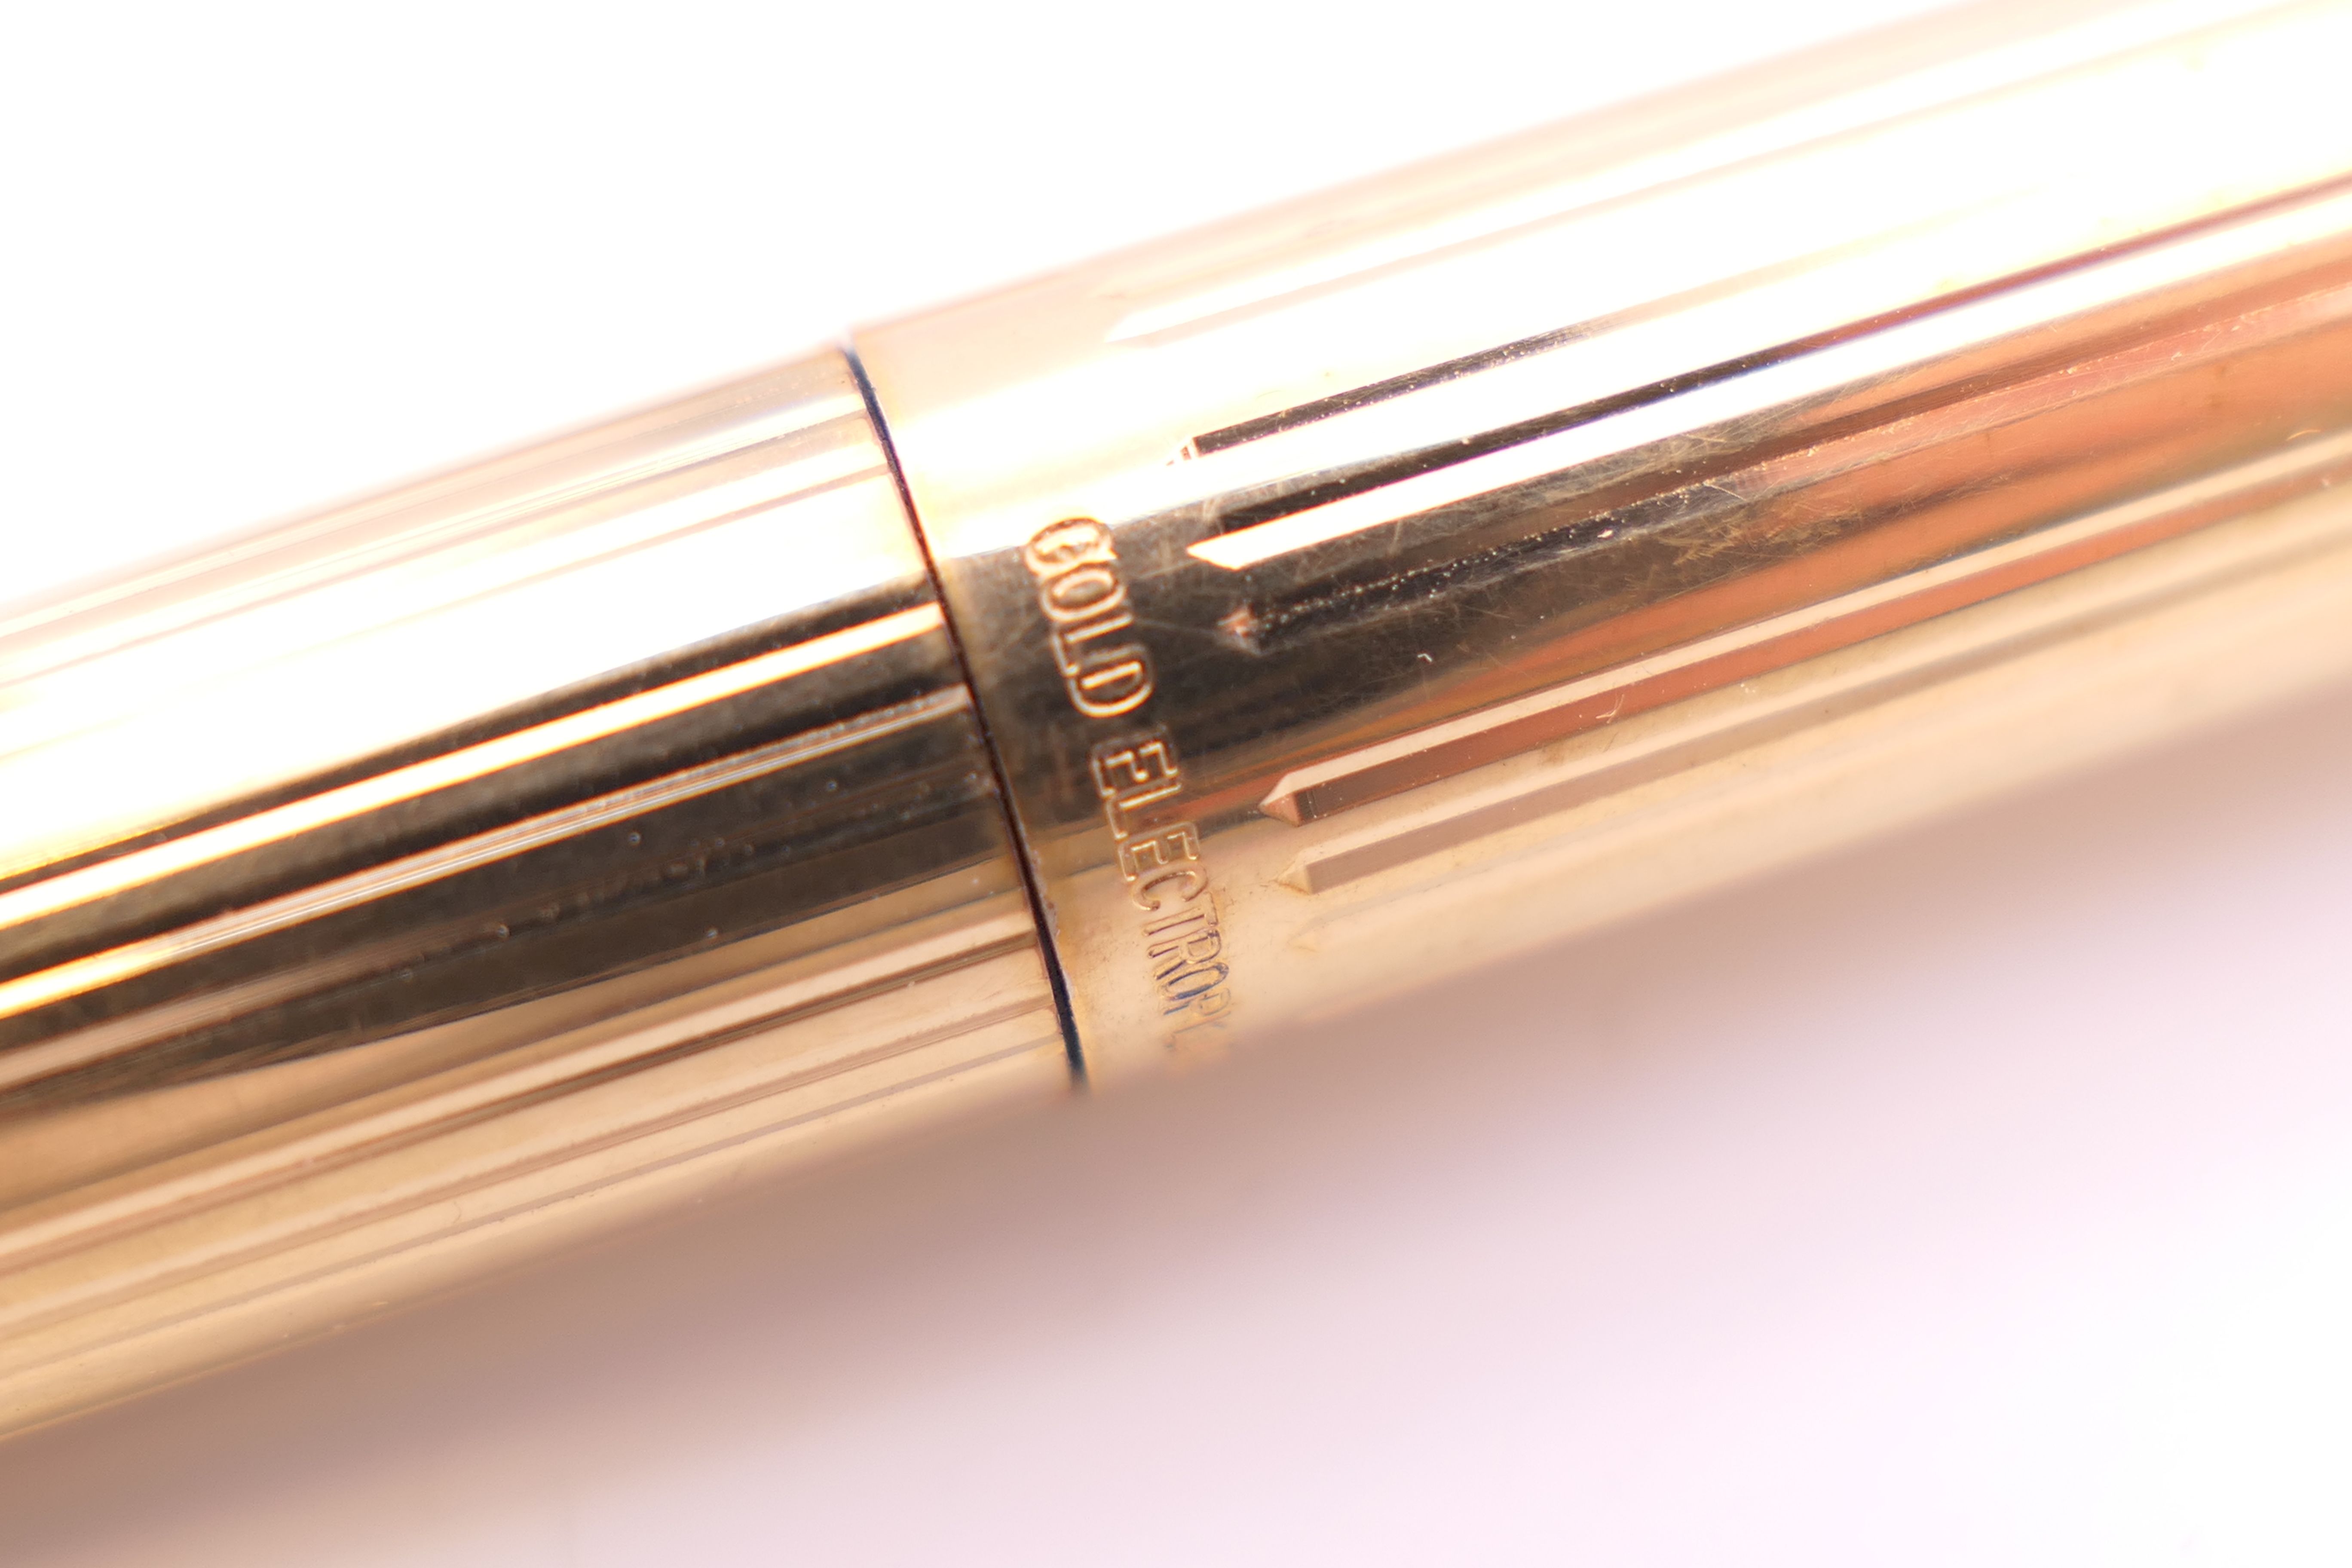 A Sheaffer fountain pen with 14 K gold nib and a Shaeffer ballpoint pen. - Image 2 of 9